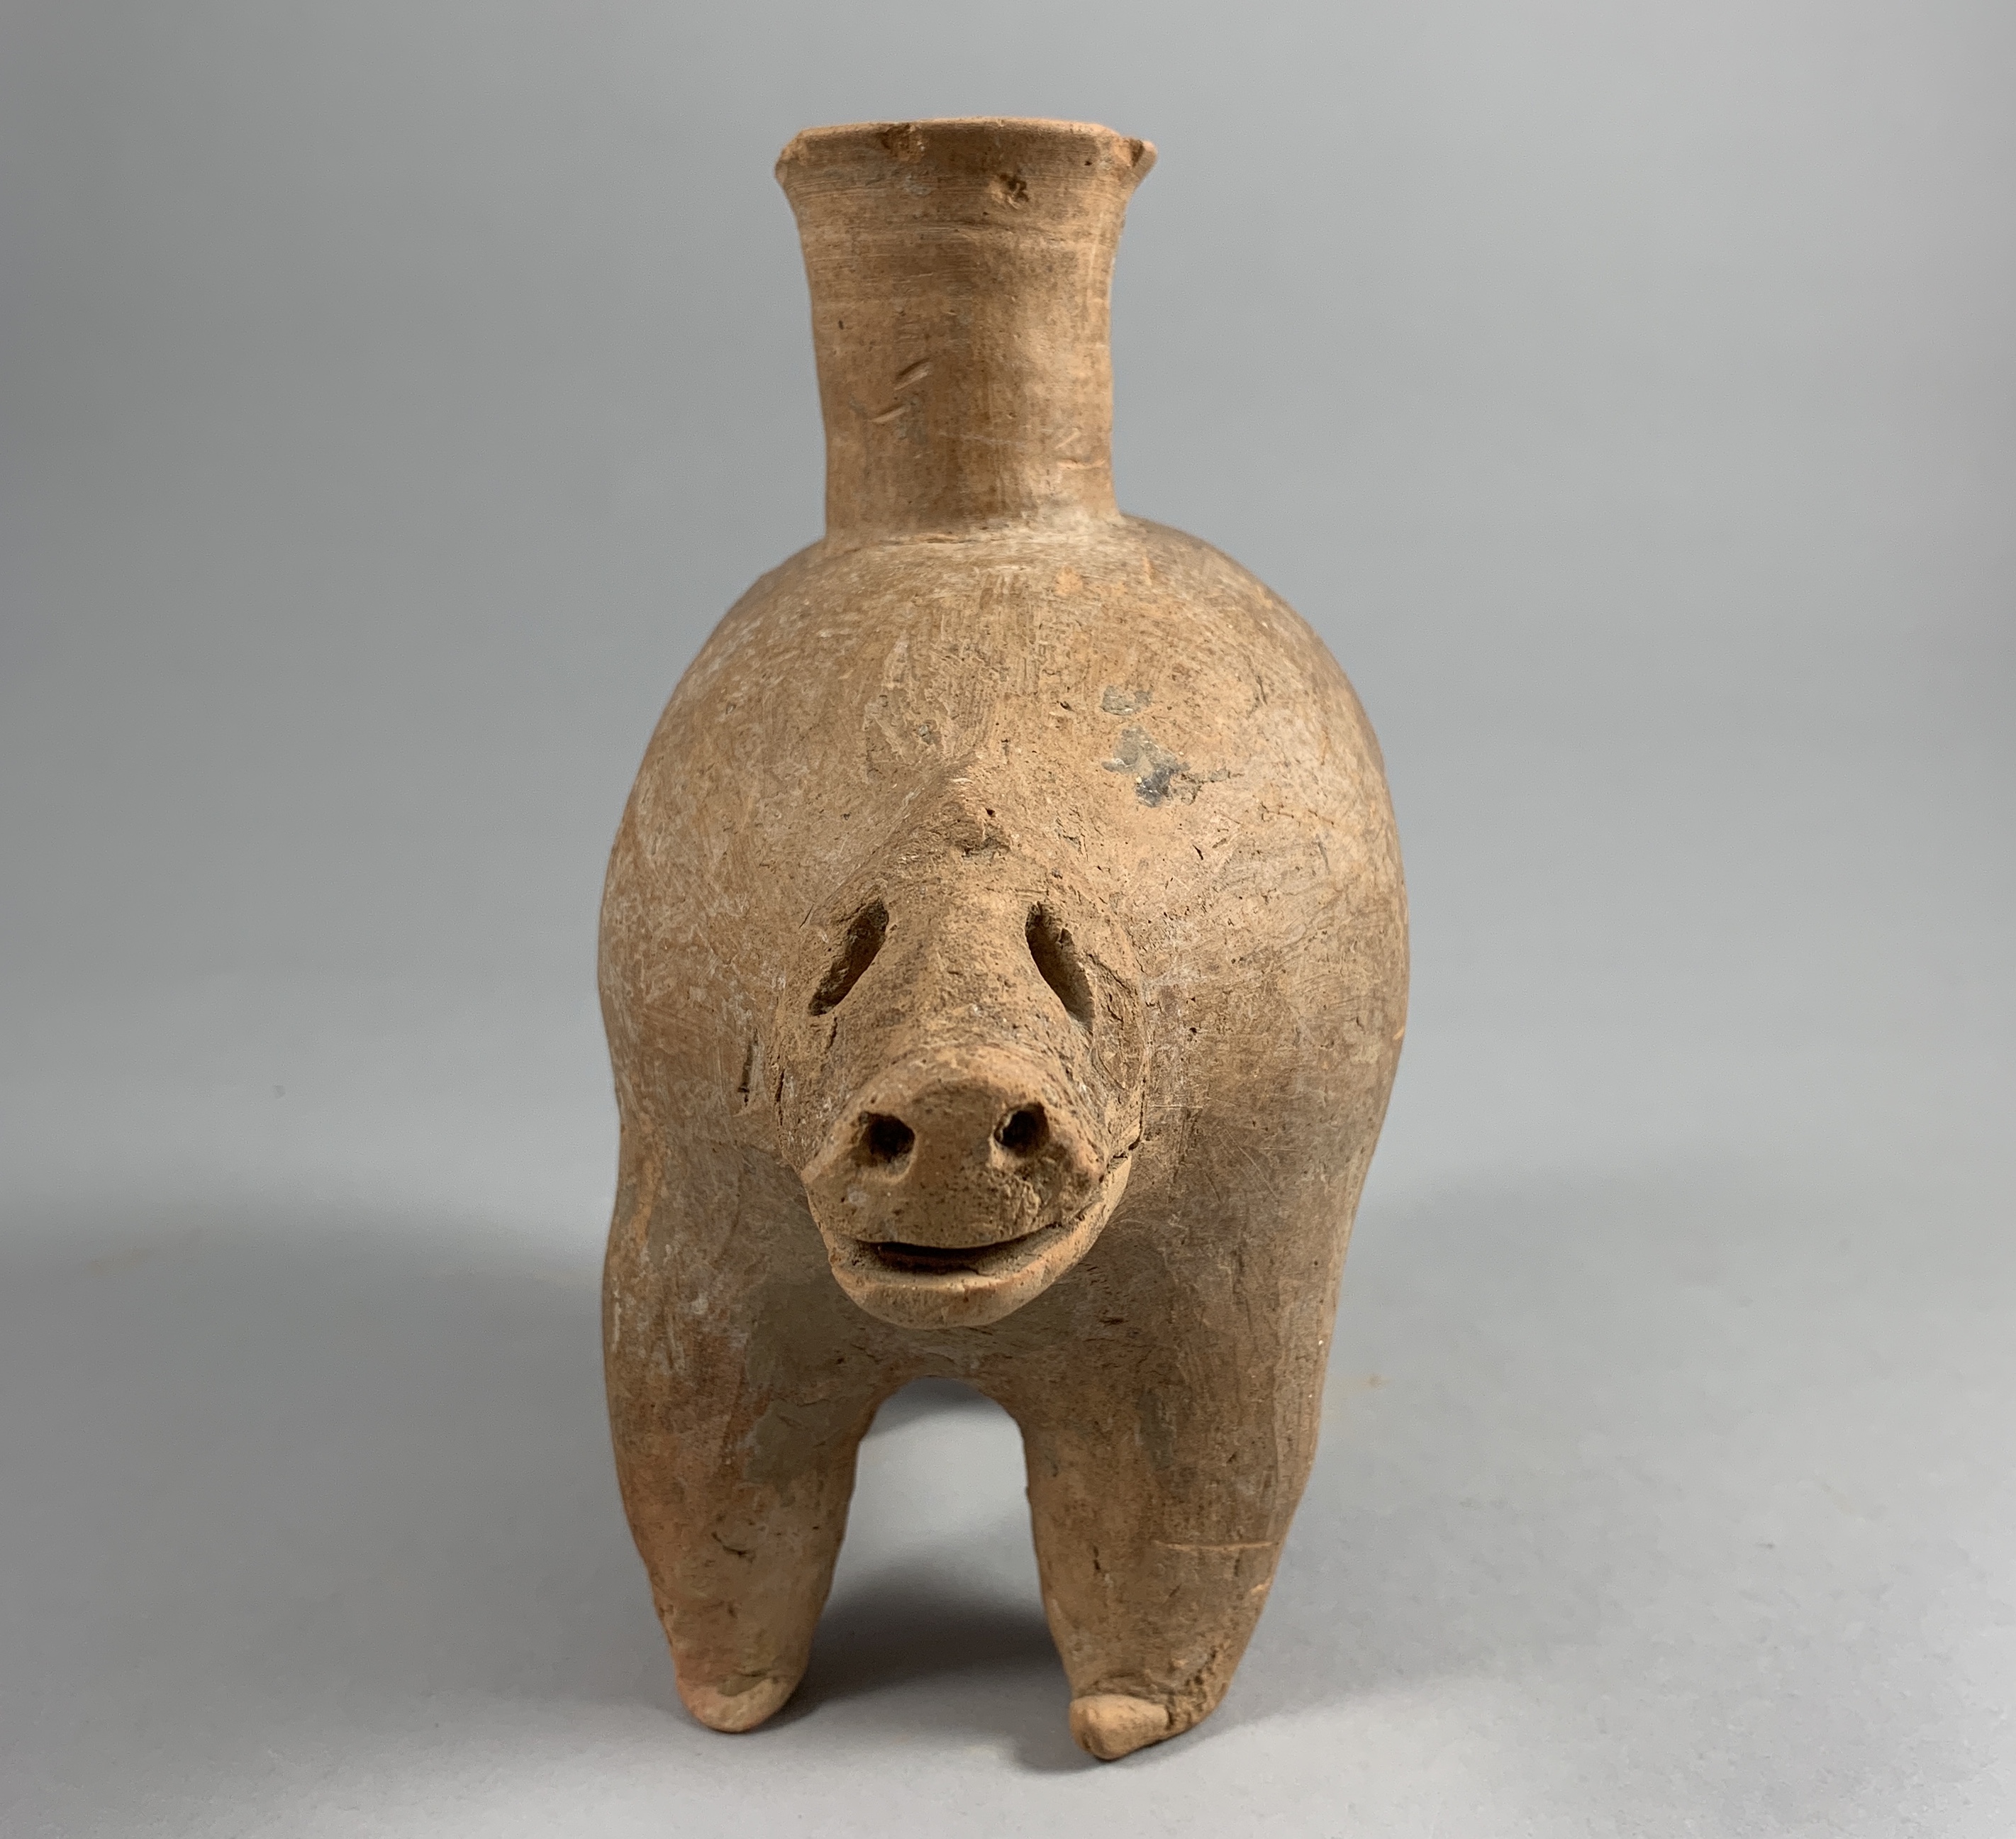 A Red Pottery Jar In The Form Of A Bear, Gansu Province, Qijia Culture (2050-1700 Bc) - Image 18 of 19